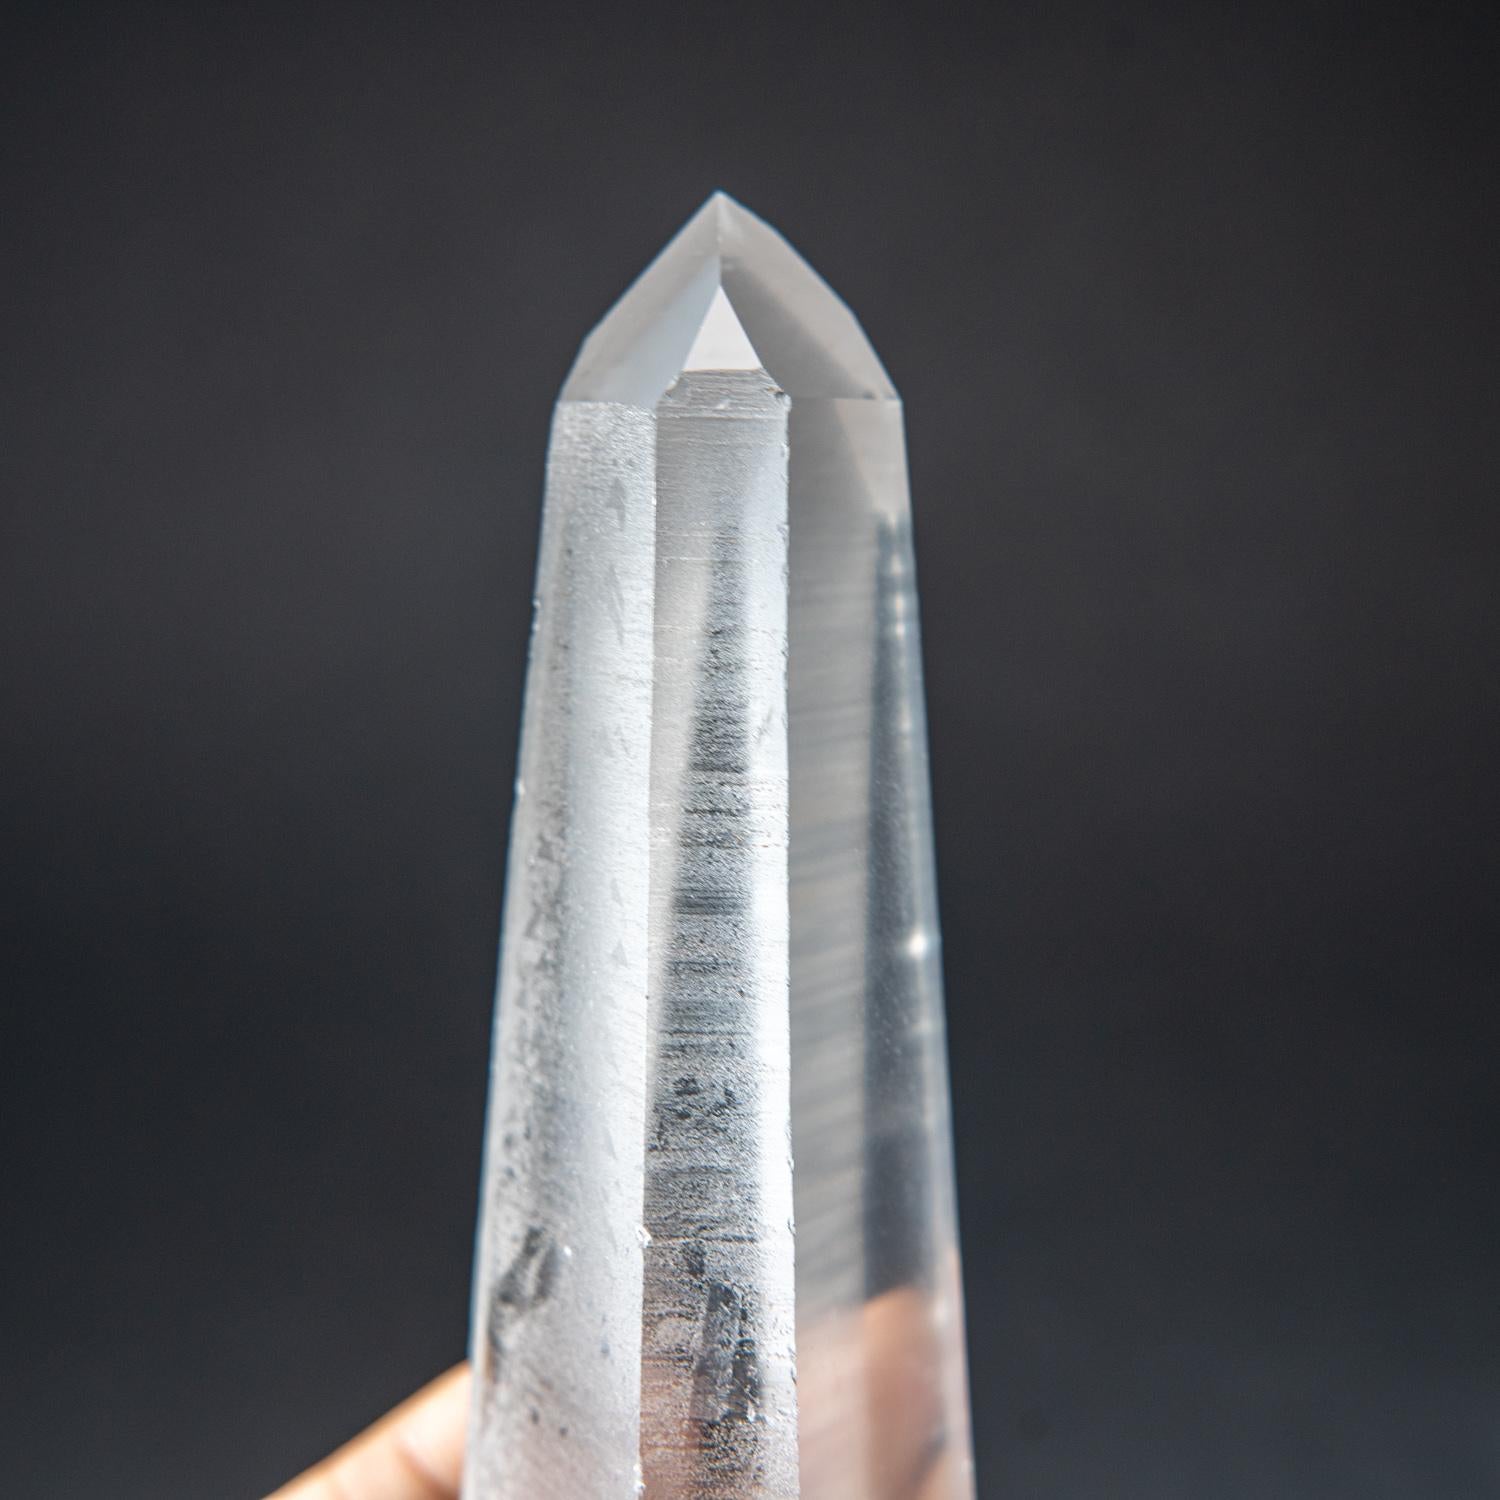 This natural 2.75 lb Brazilian Lemurian Quartz is a large single specimen, featuring transparency and an intact termination. No damage is present, and the crystal is unpolished. Clear Quartz is famously known as the 